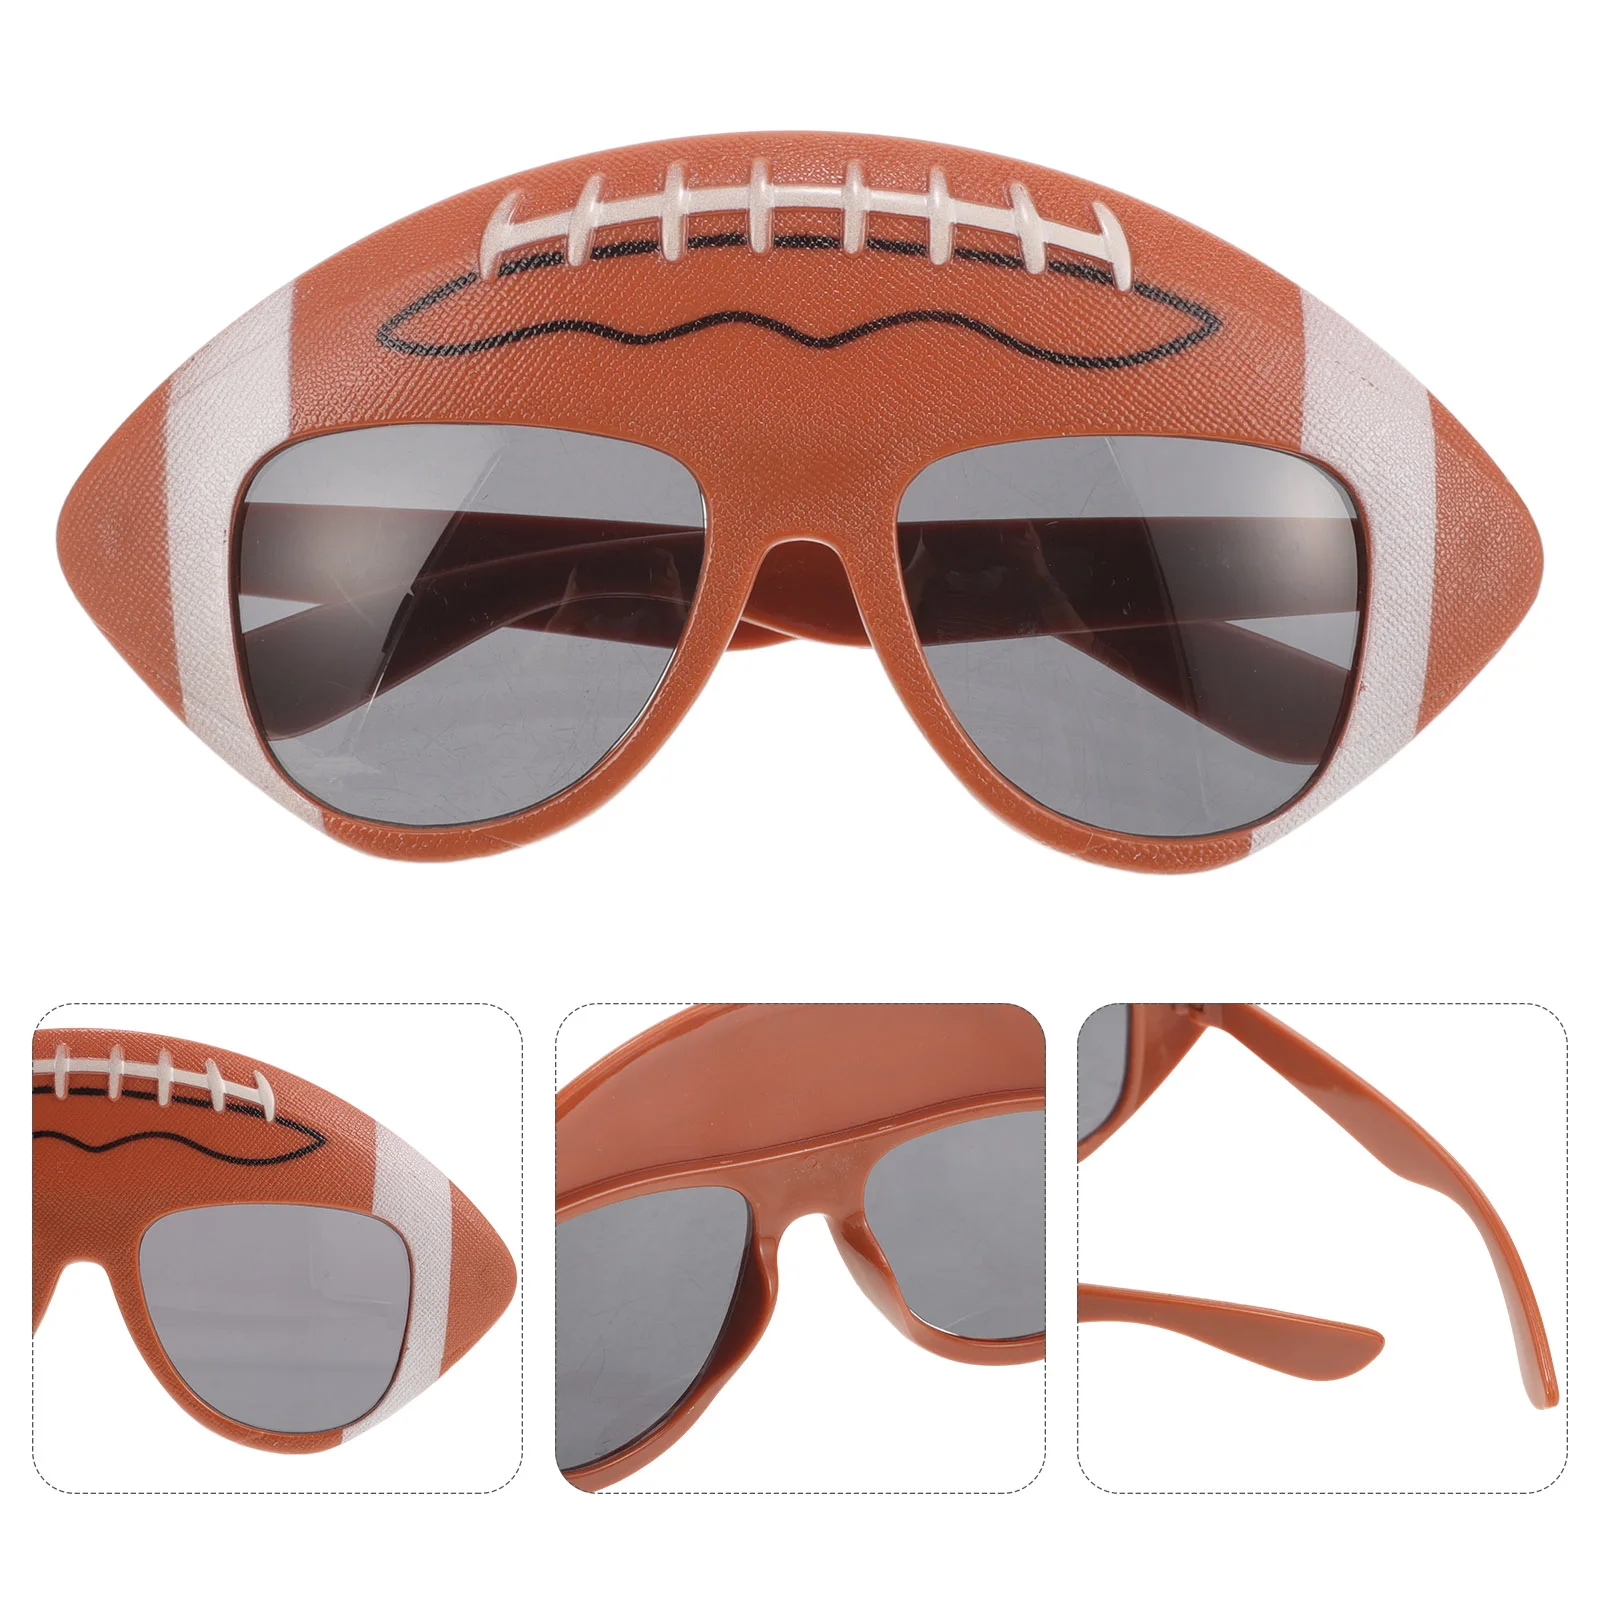 

Party Glasses Rugby Shape Beach Party Sunglasses Novelty Sunglasses Funky Sunglasses